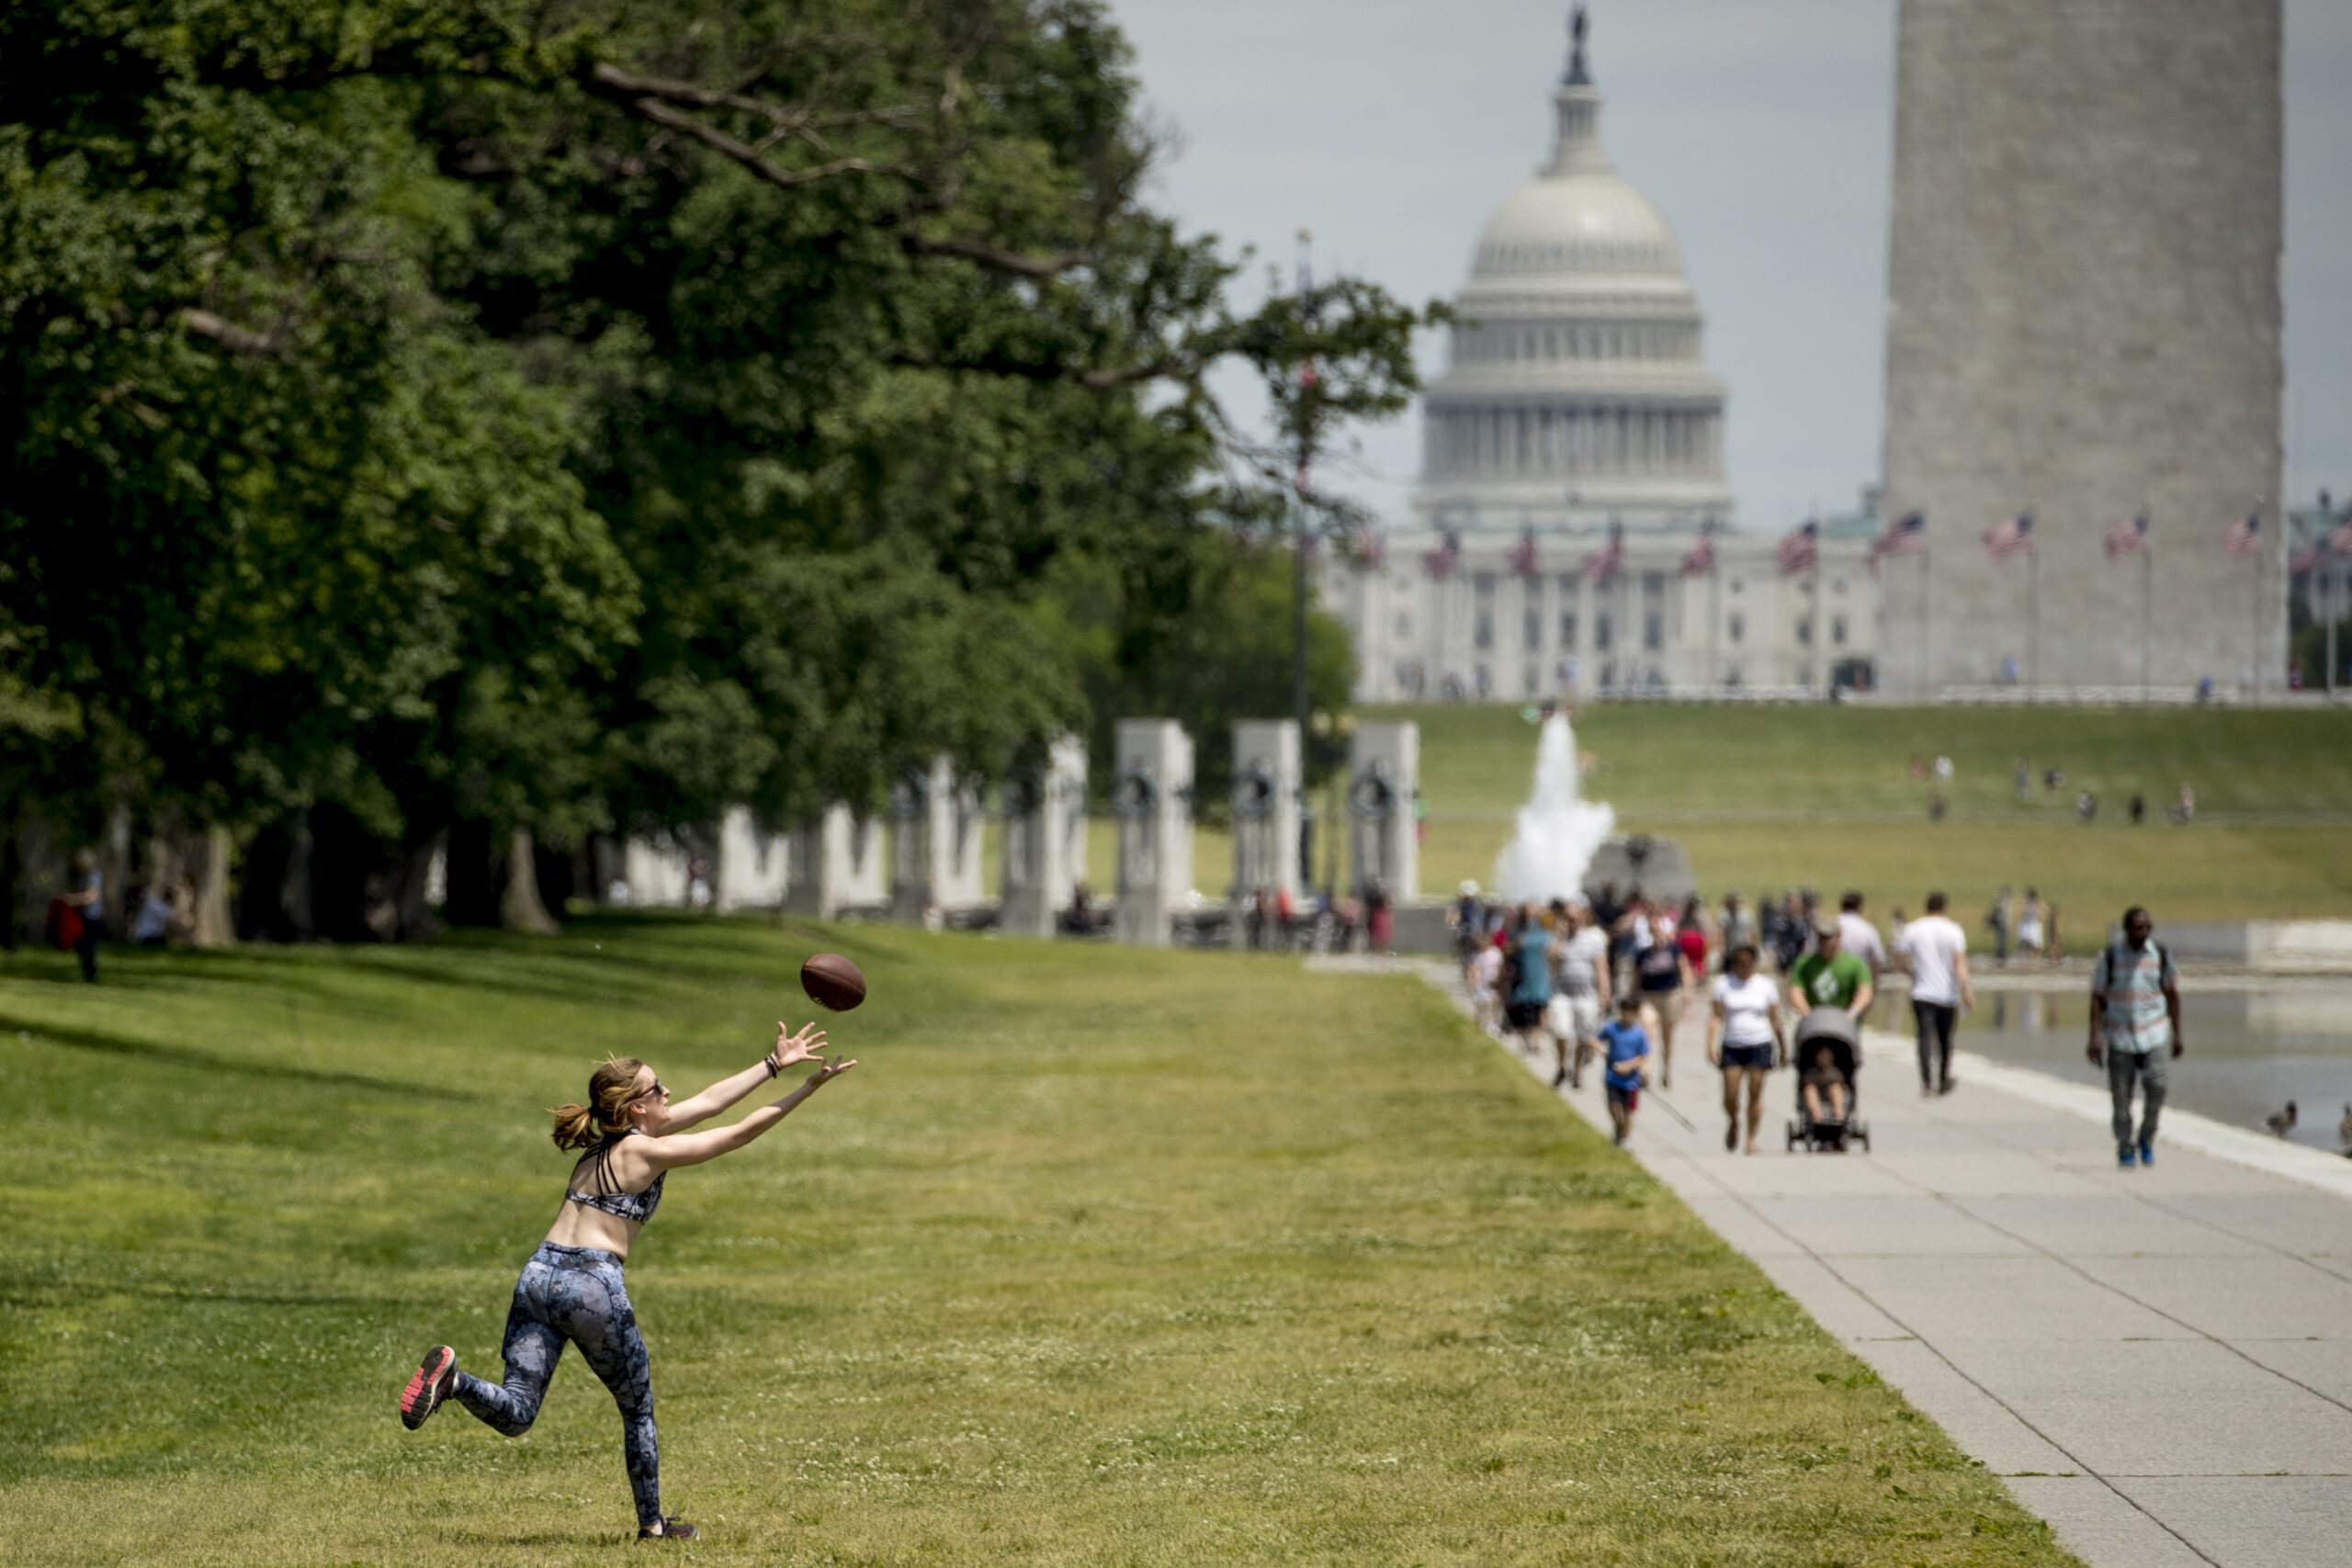 A woman catching a football in front of U.S. Capitol